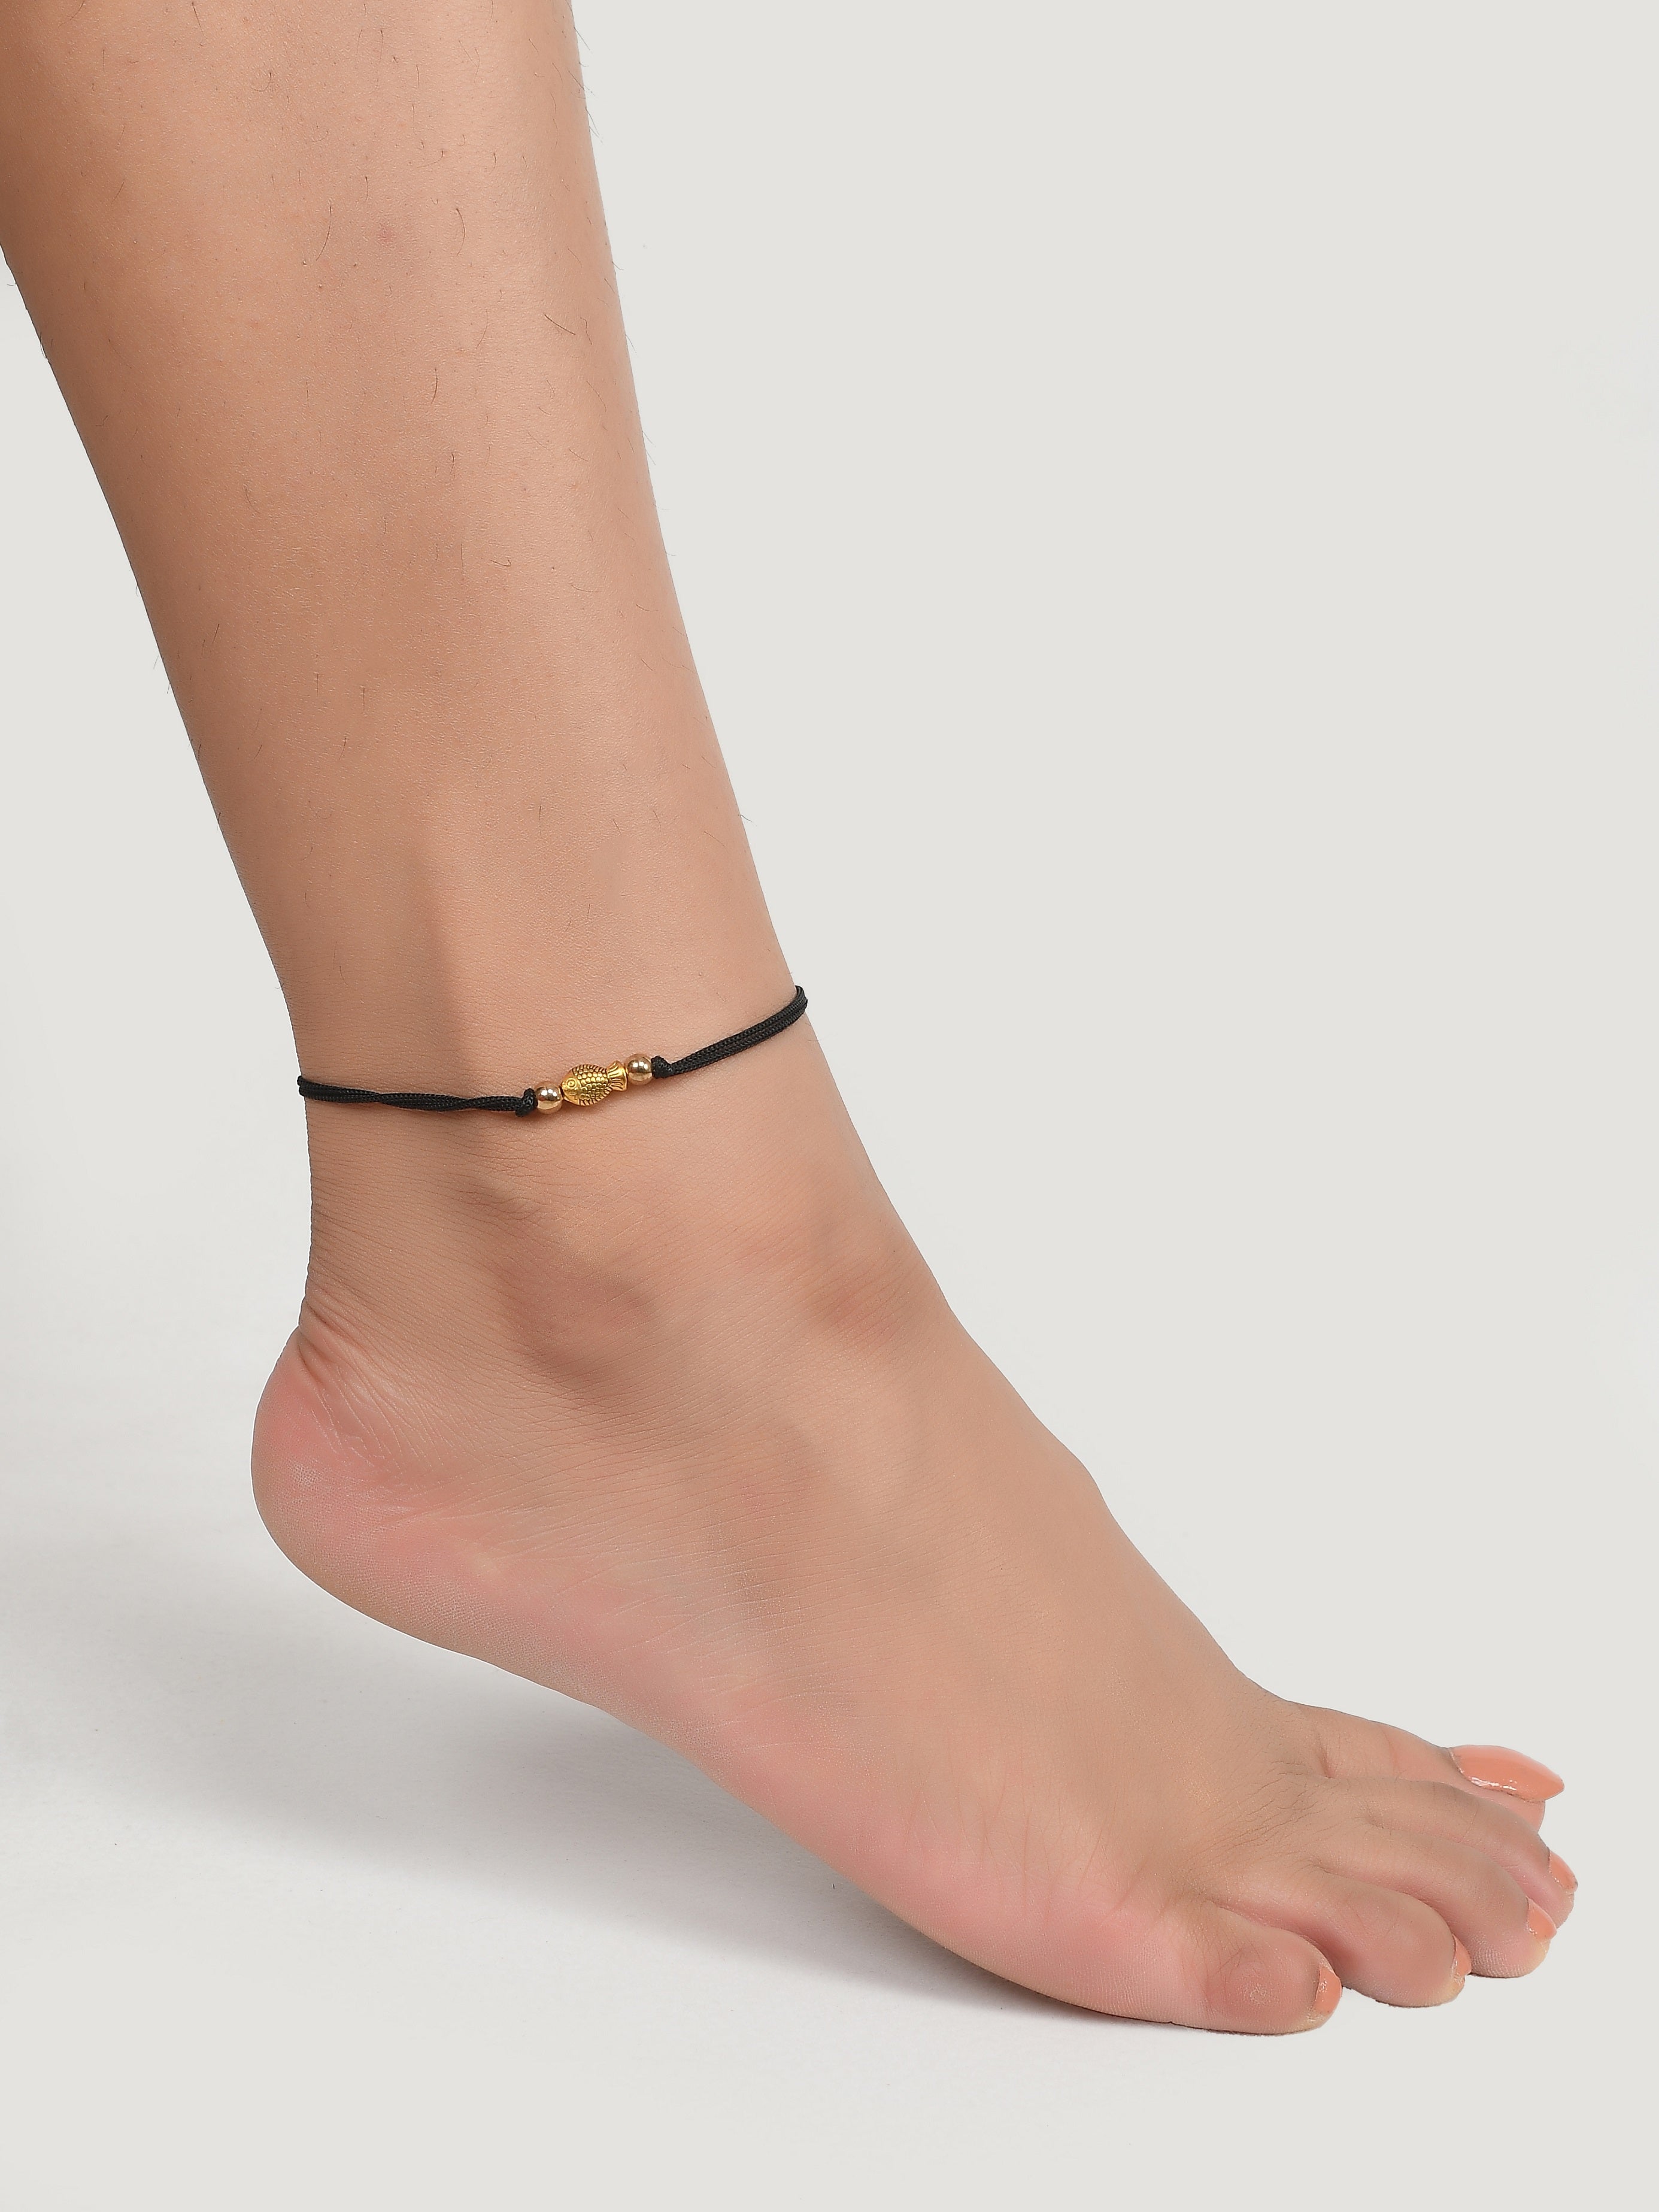 Umualanso Umuchu - #Anklet “What is the symbolic meaning of wearing anklets?  An anklet, also called ankle chain, ankle bracelet or ankle string, is an  ornament worn around the ankle. Barefoot anklets